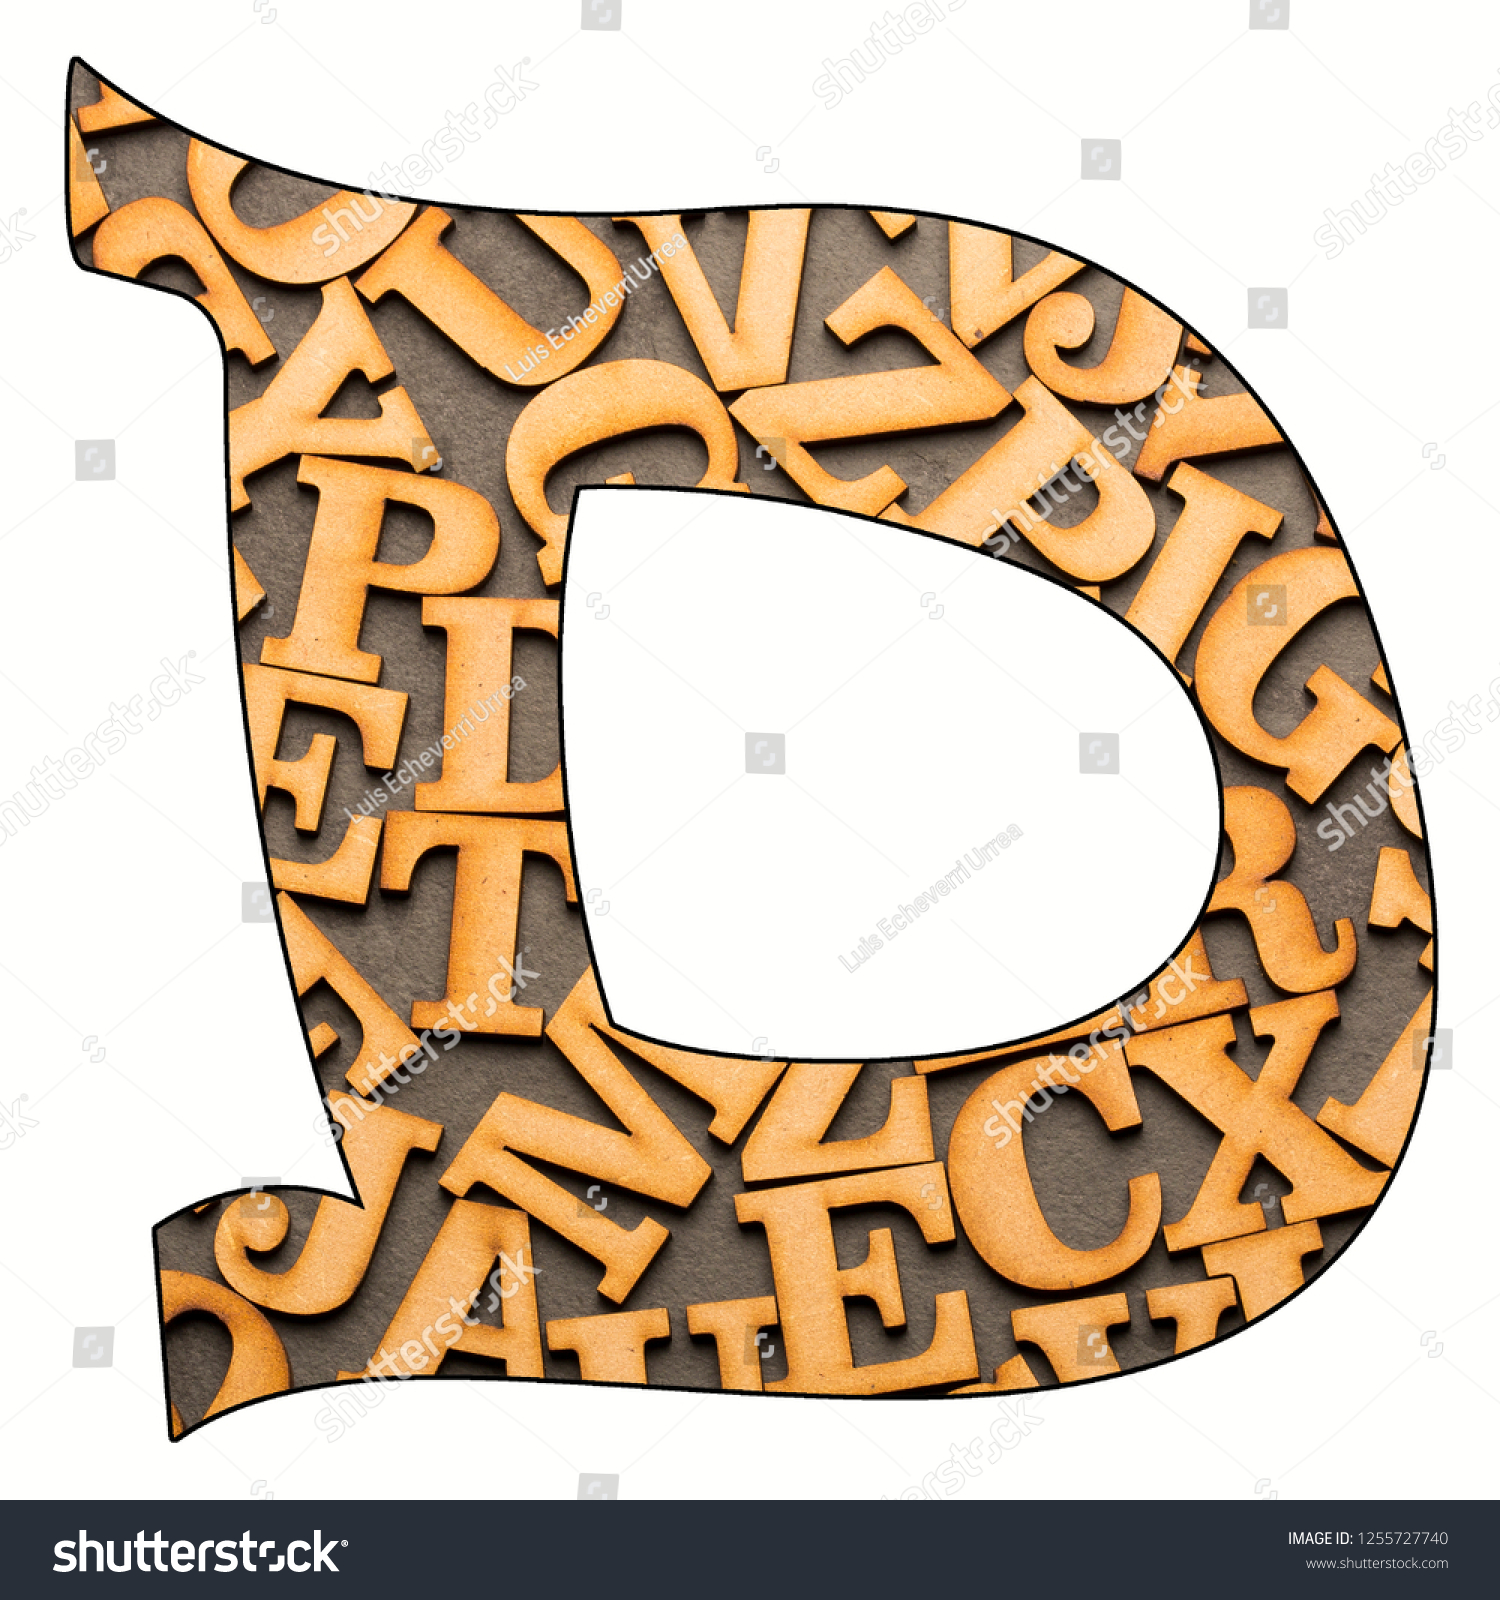 D, Letter of the alphabet - Wooden letters. White background #1255727740